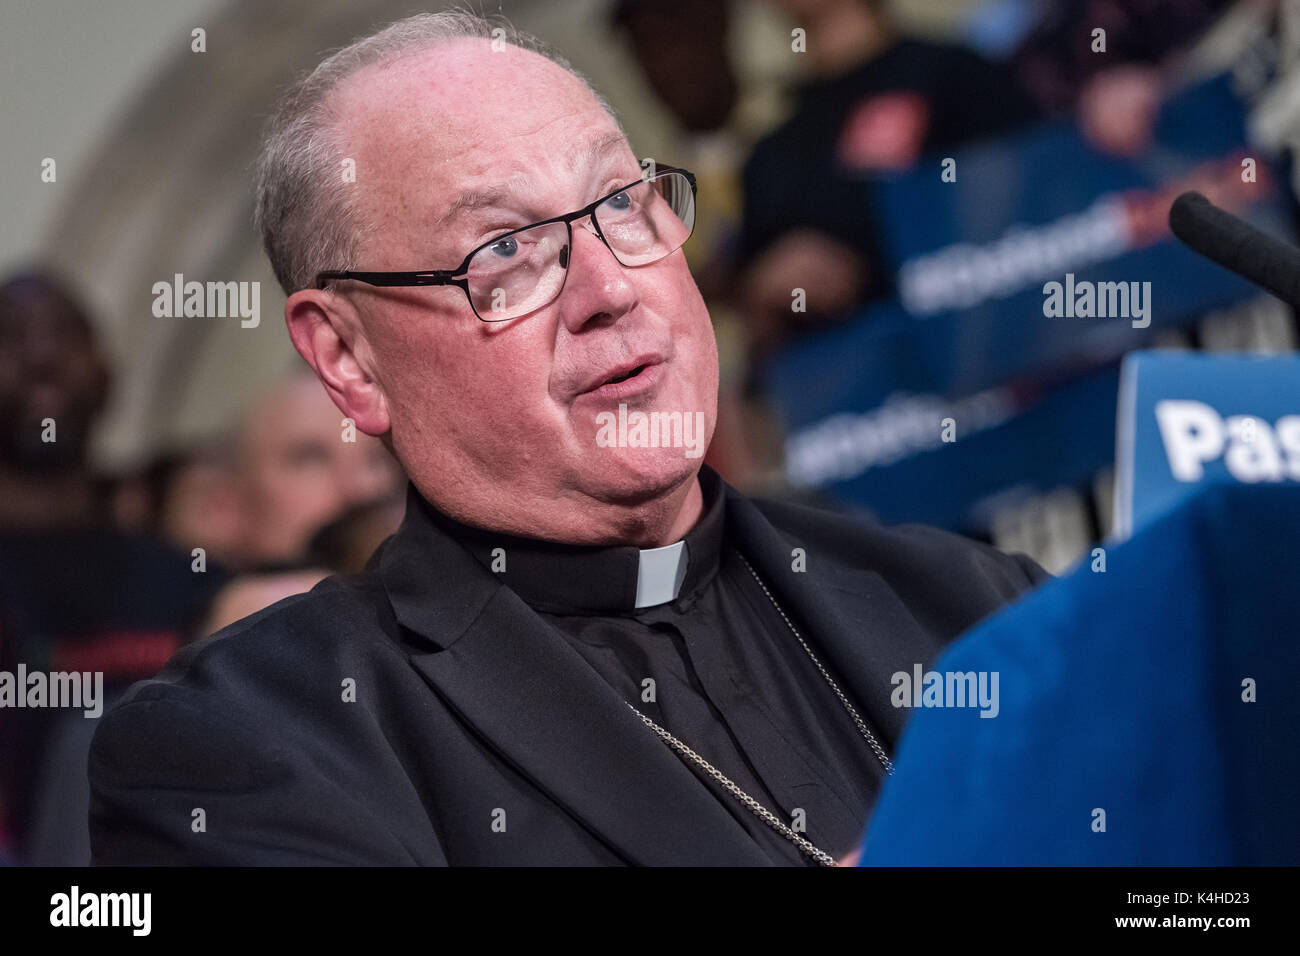 New York, United States. 05th Sep, 2017. Cardinal Timothy Dolan is seen in City Hall. Following President Donald J. Trump's decision to revoke the Obama-era 'Deferred Action for Childhood Arrivals' (DACA) policy, NYC Mayor, First Lady Chirlaine McCray, key elected City officials and clergy spoke at a rally inside City Hall's rotunda. Credit: PACIFIC PRESS/Alamy Live News Stock Photo